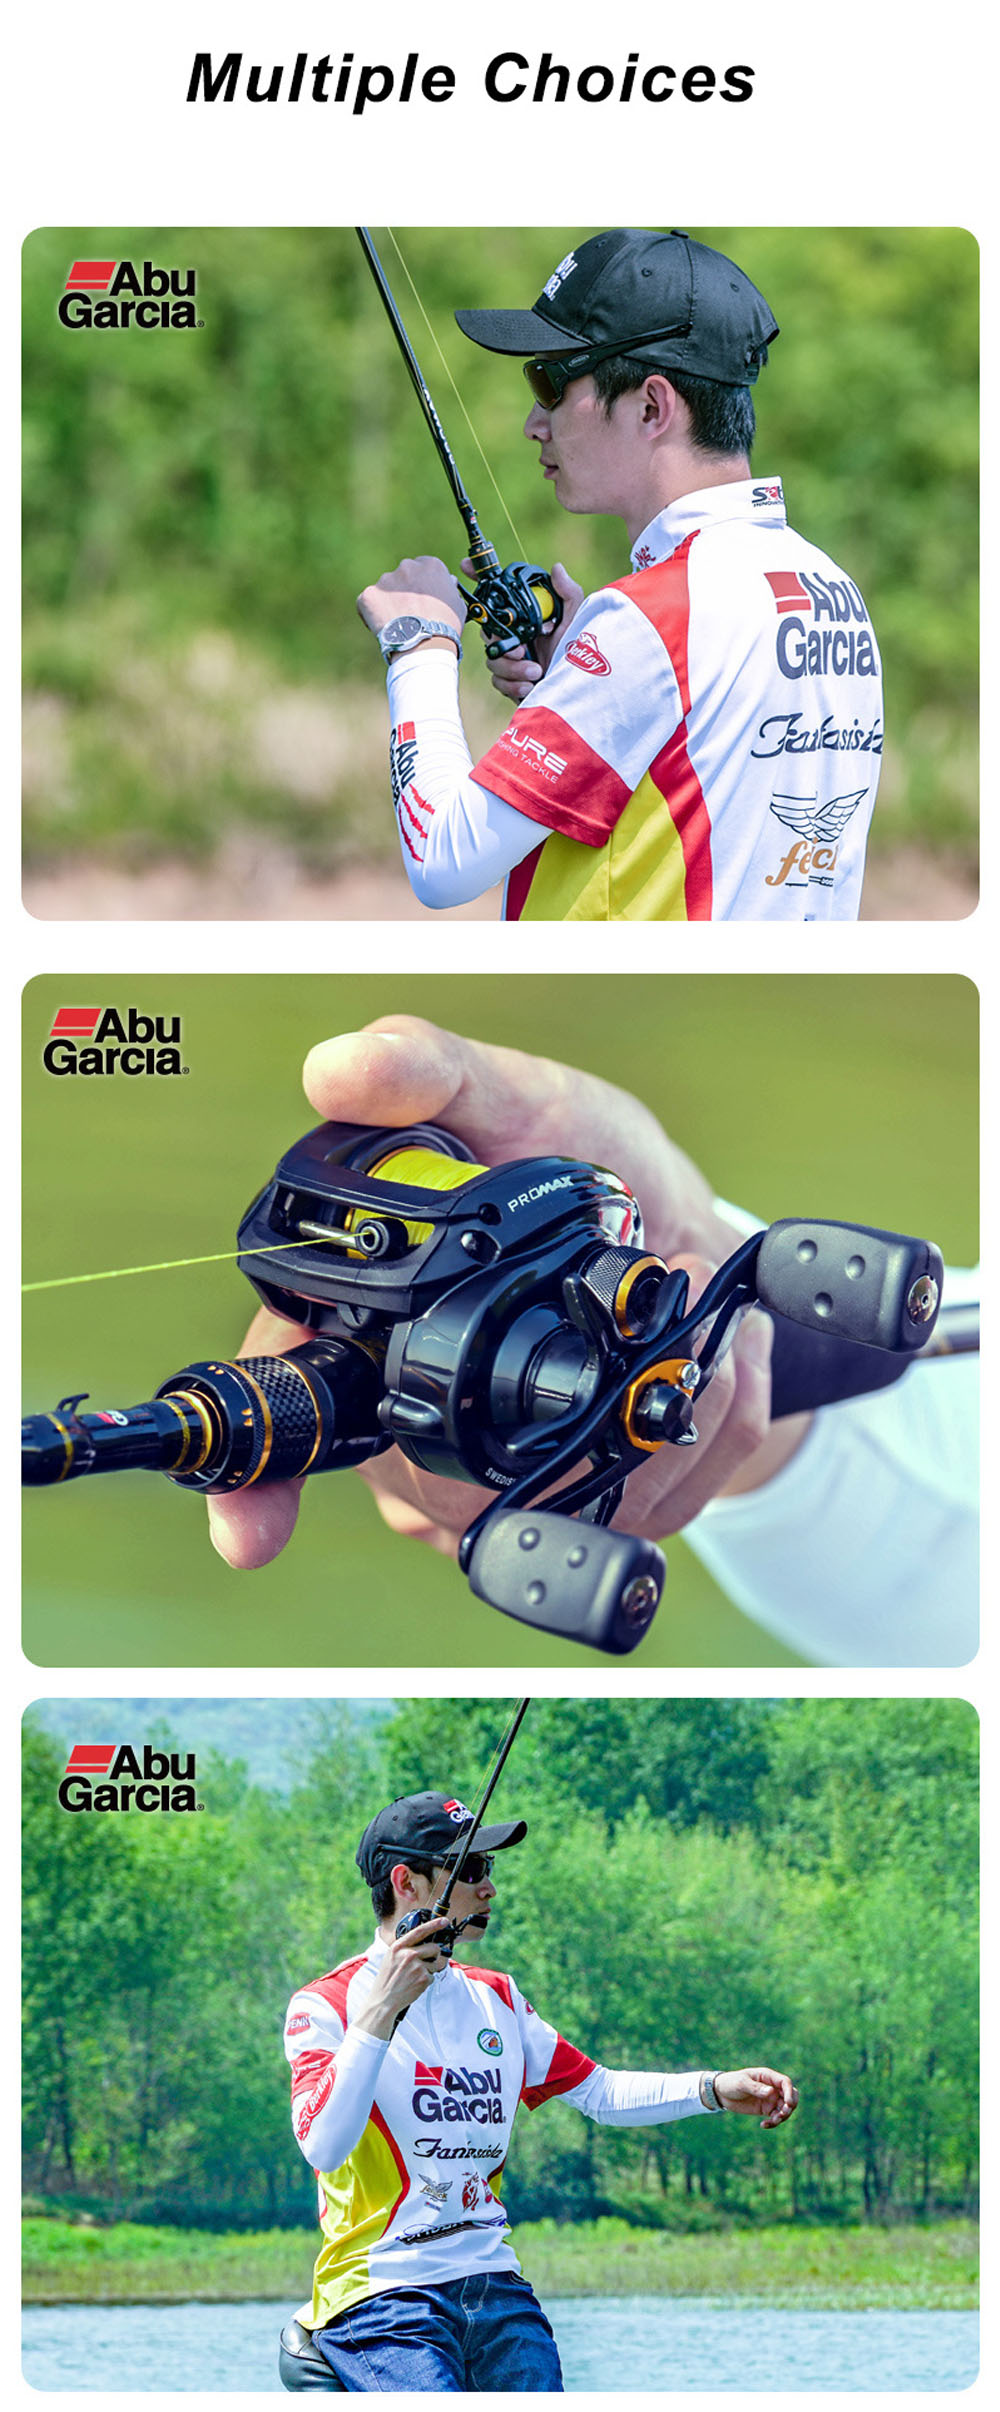 Abu-Garcia-PMAX3-71BB-Fishing-Reel-Metal-Long-Casting-Reel-Super-Smooth-Double-Brake-Left-and-Right--1872723-5